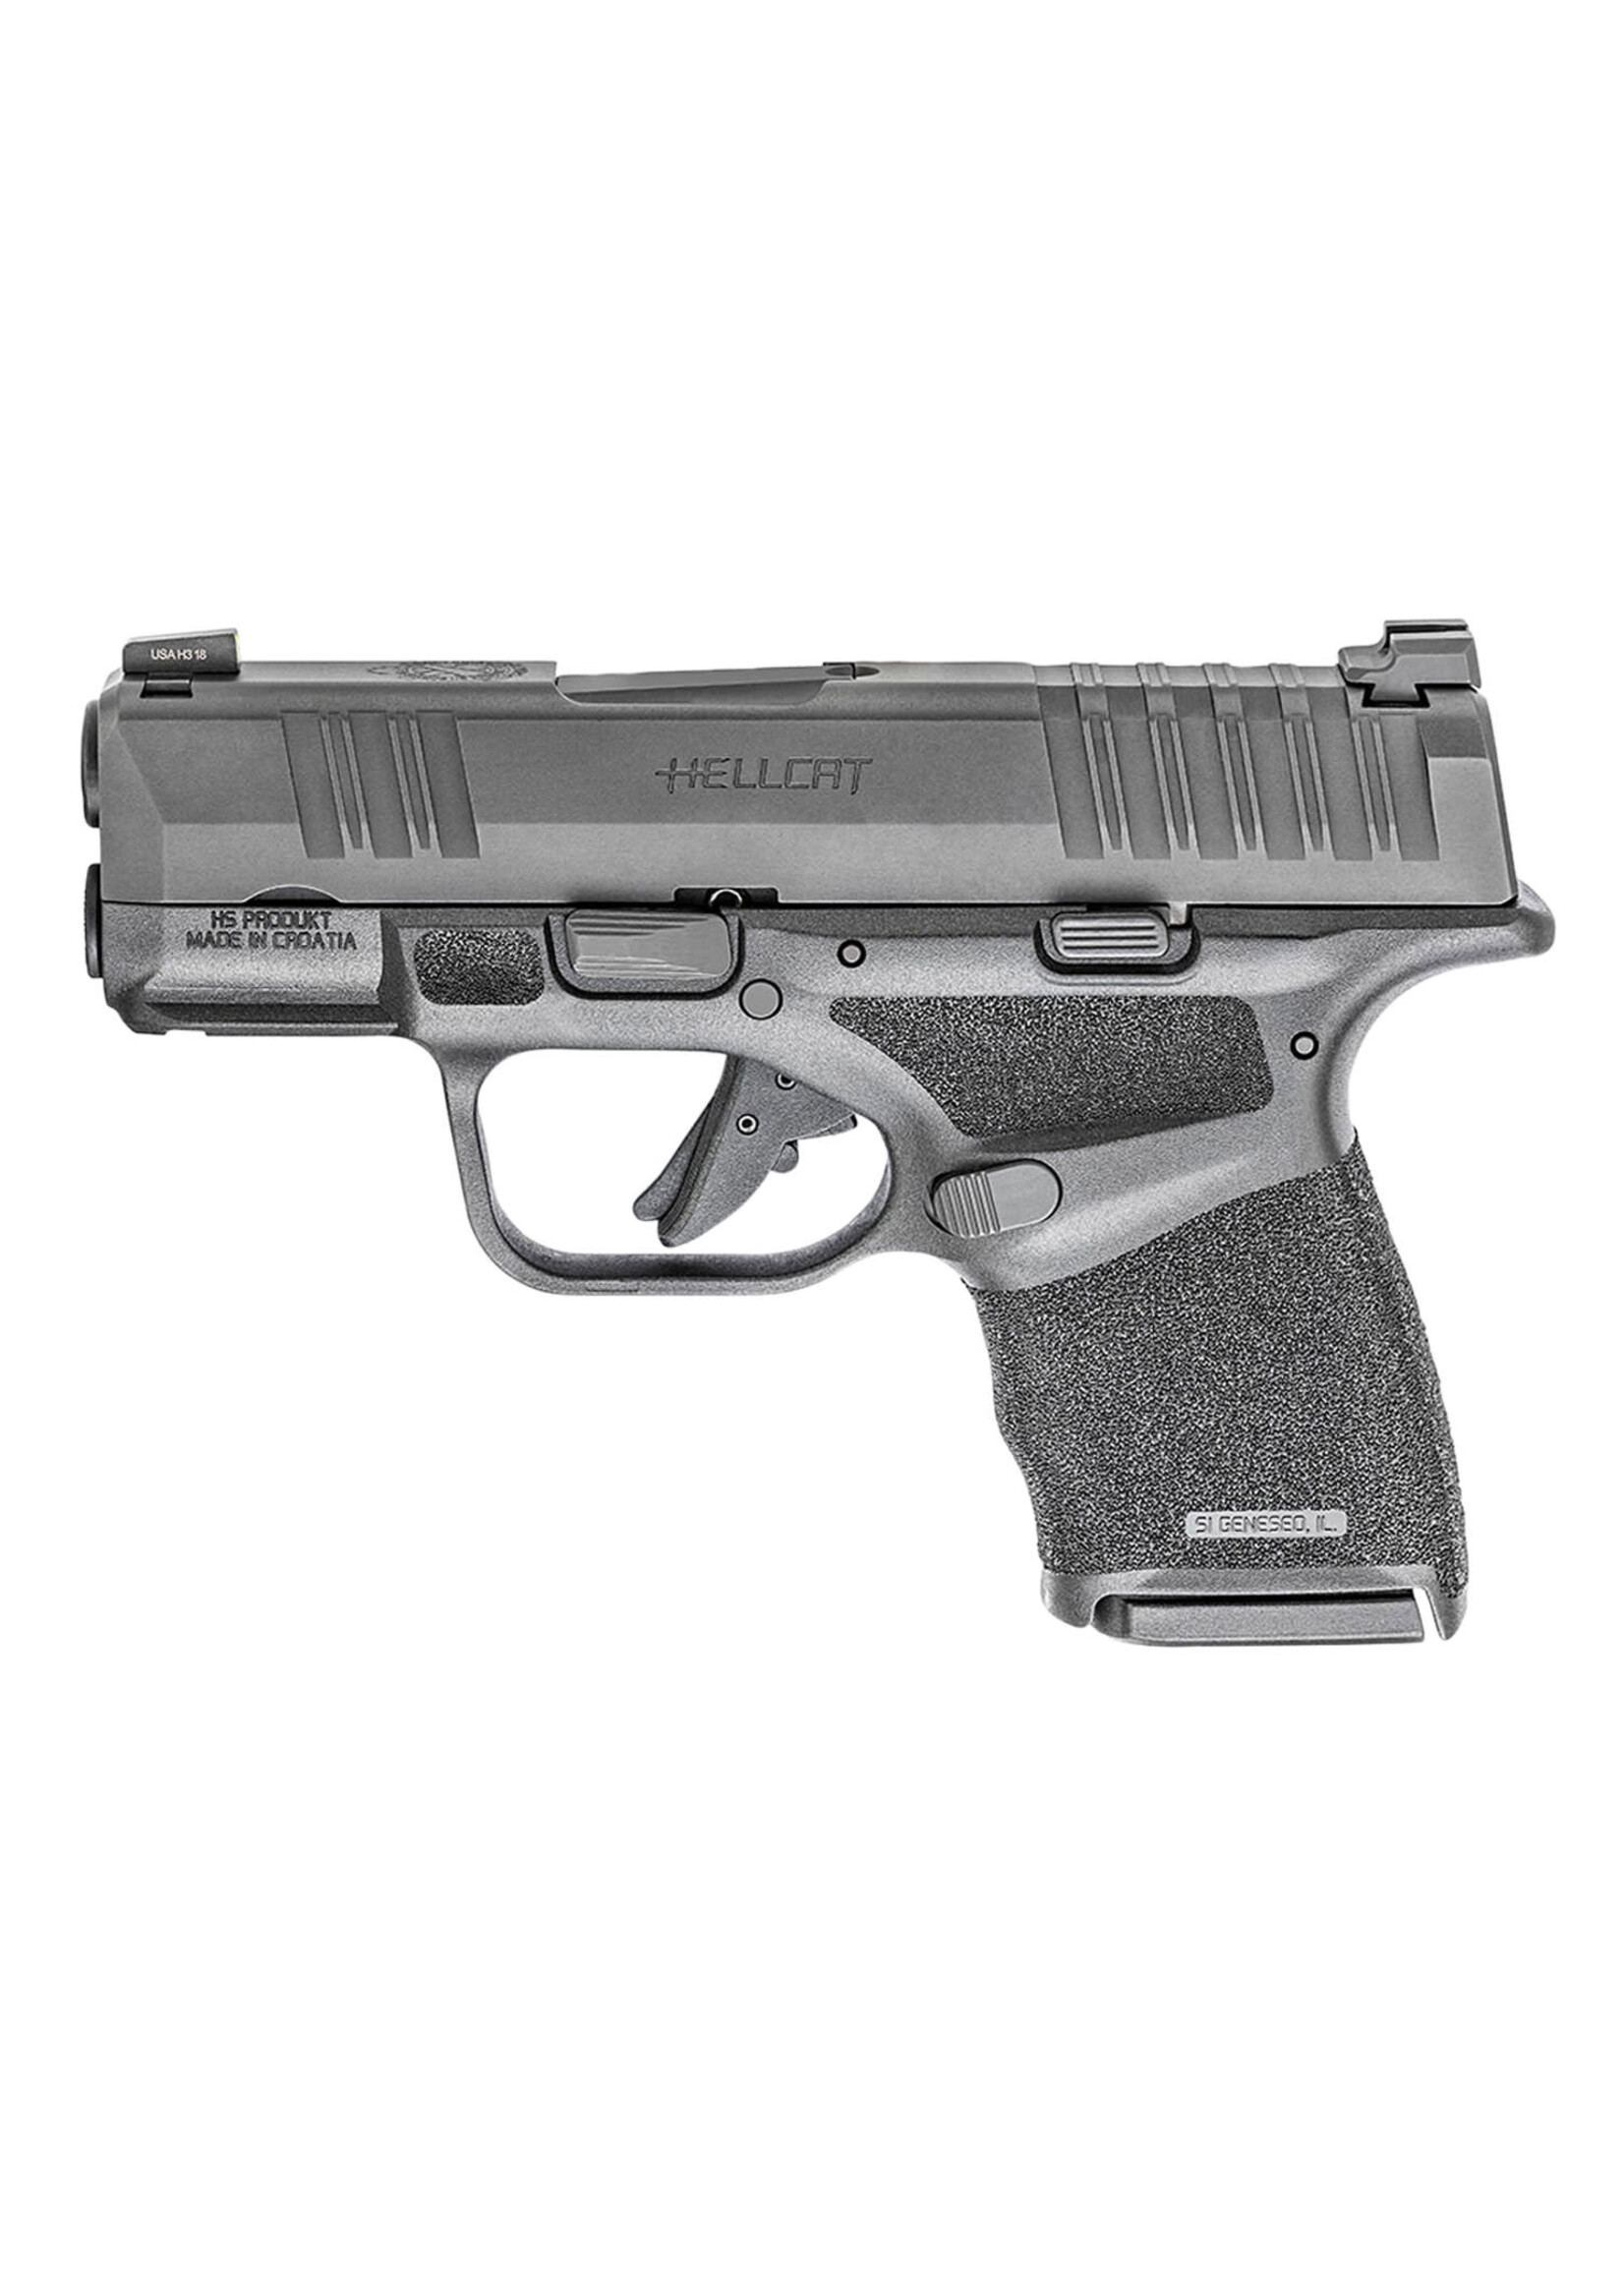 Springfield Armory Springfield Armory HC9319B Hellcat Micro-Compact 9mm Luger 11+1/13+1, 3" Black Melonite Hammer Forged Barrel, Black Melonite Serrated Slide, Black Polymer Frame w/Picatinny Rail, Adaptive Textured Polymer Grip, Right Hand